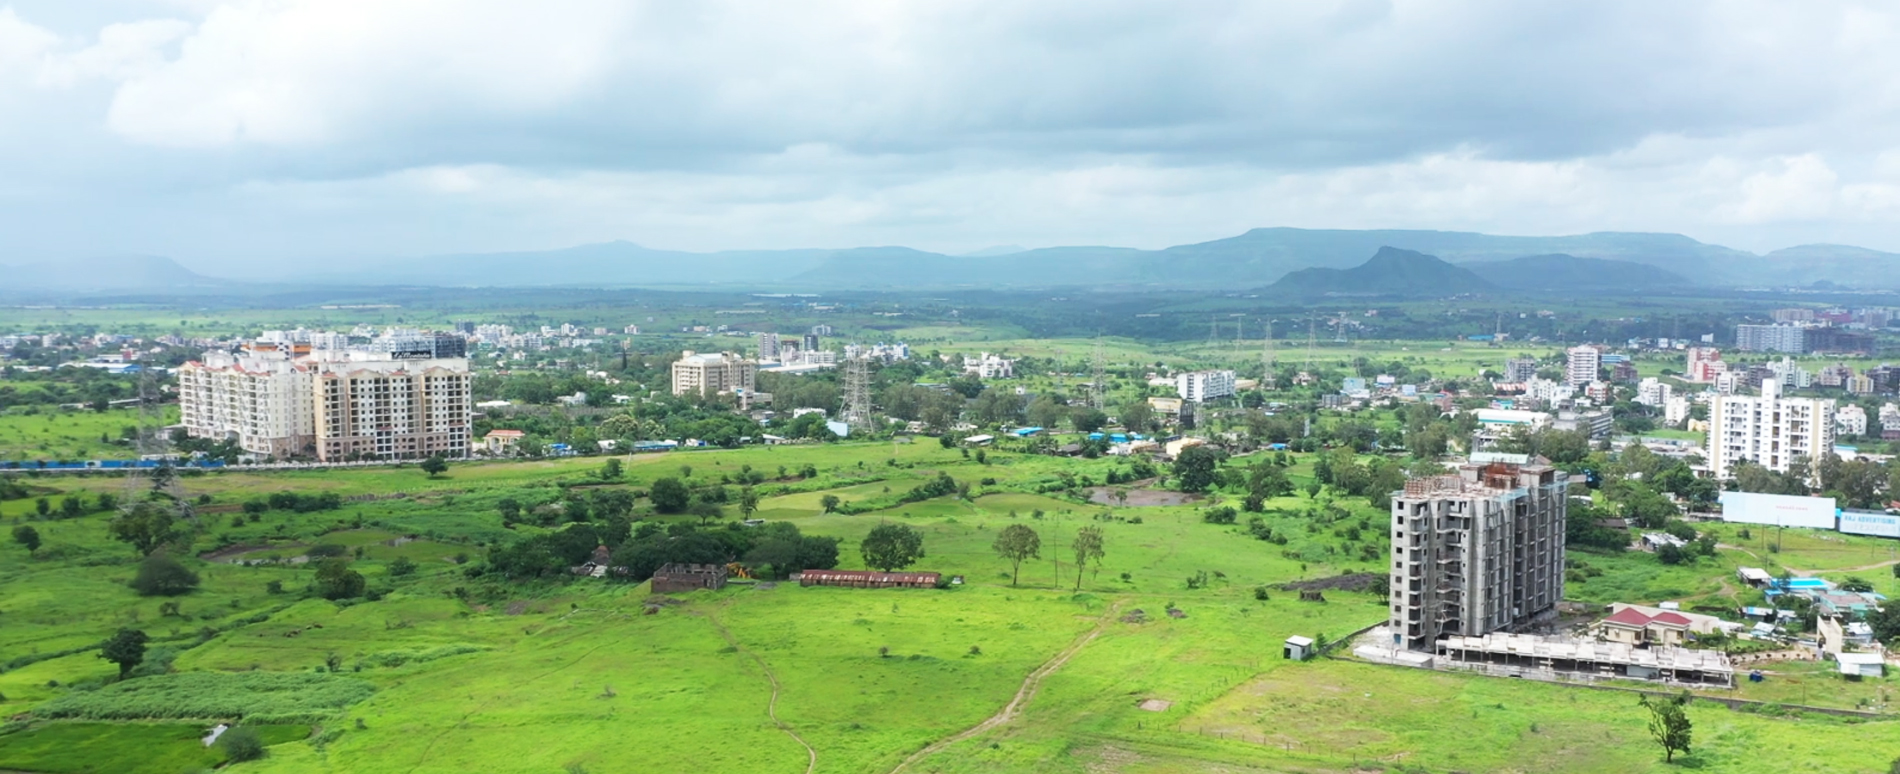 Aerial view of Vadgaon Maval, Talegaon